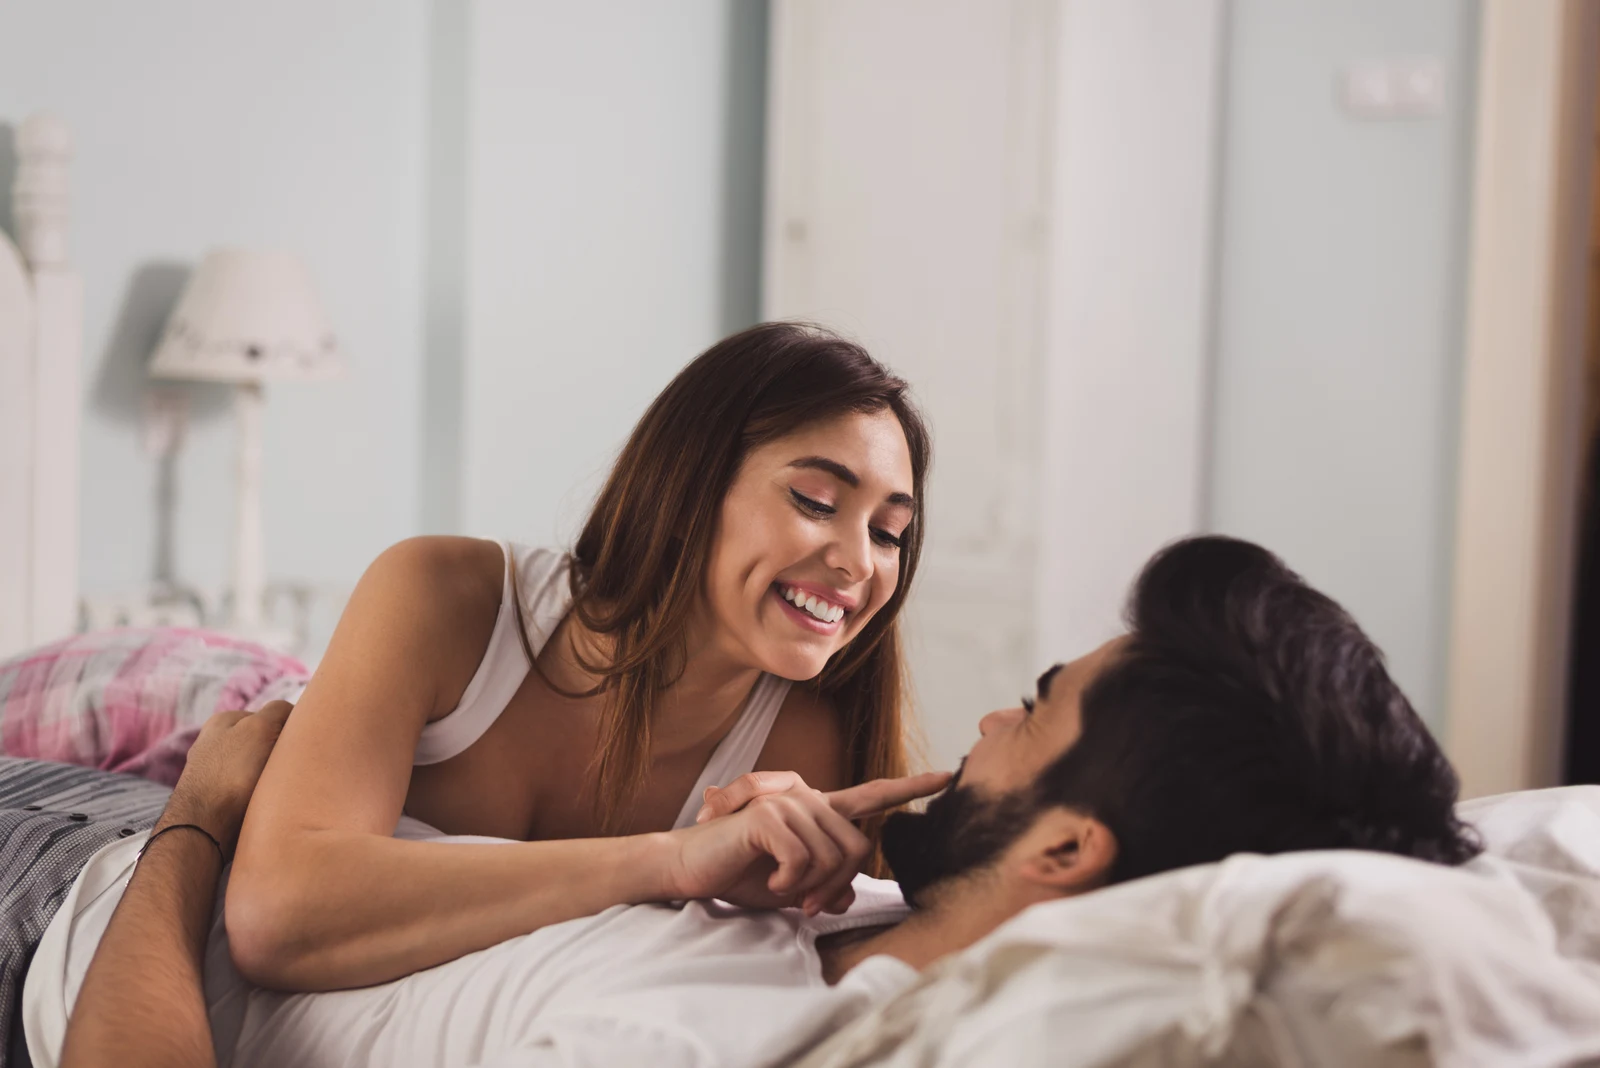 a smiling woman cuddles with a man in bed